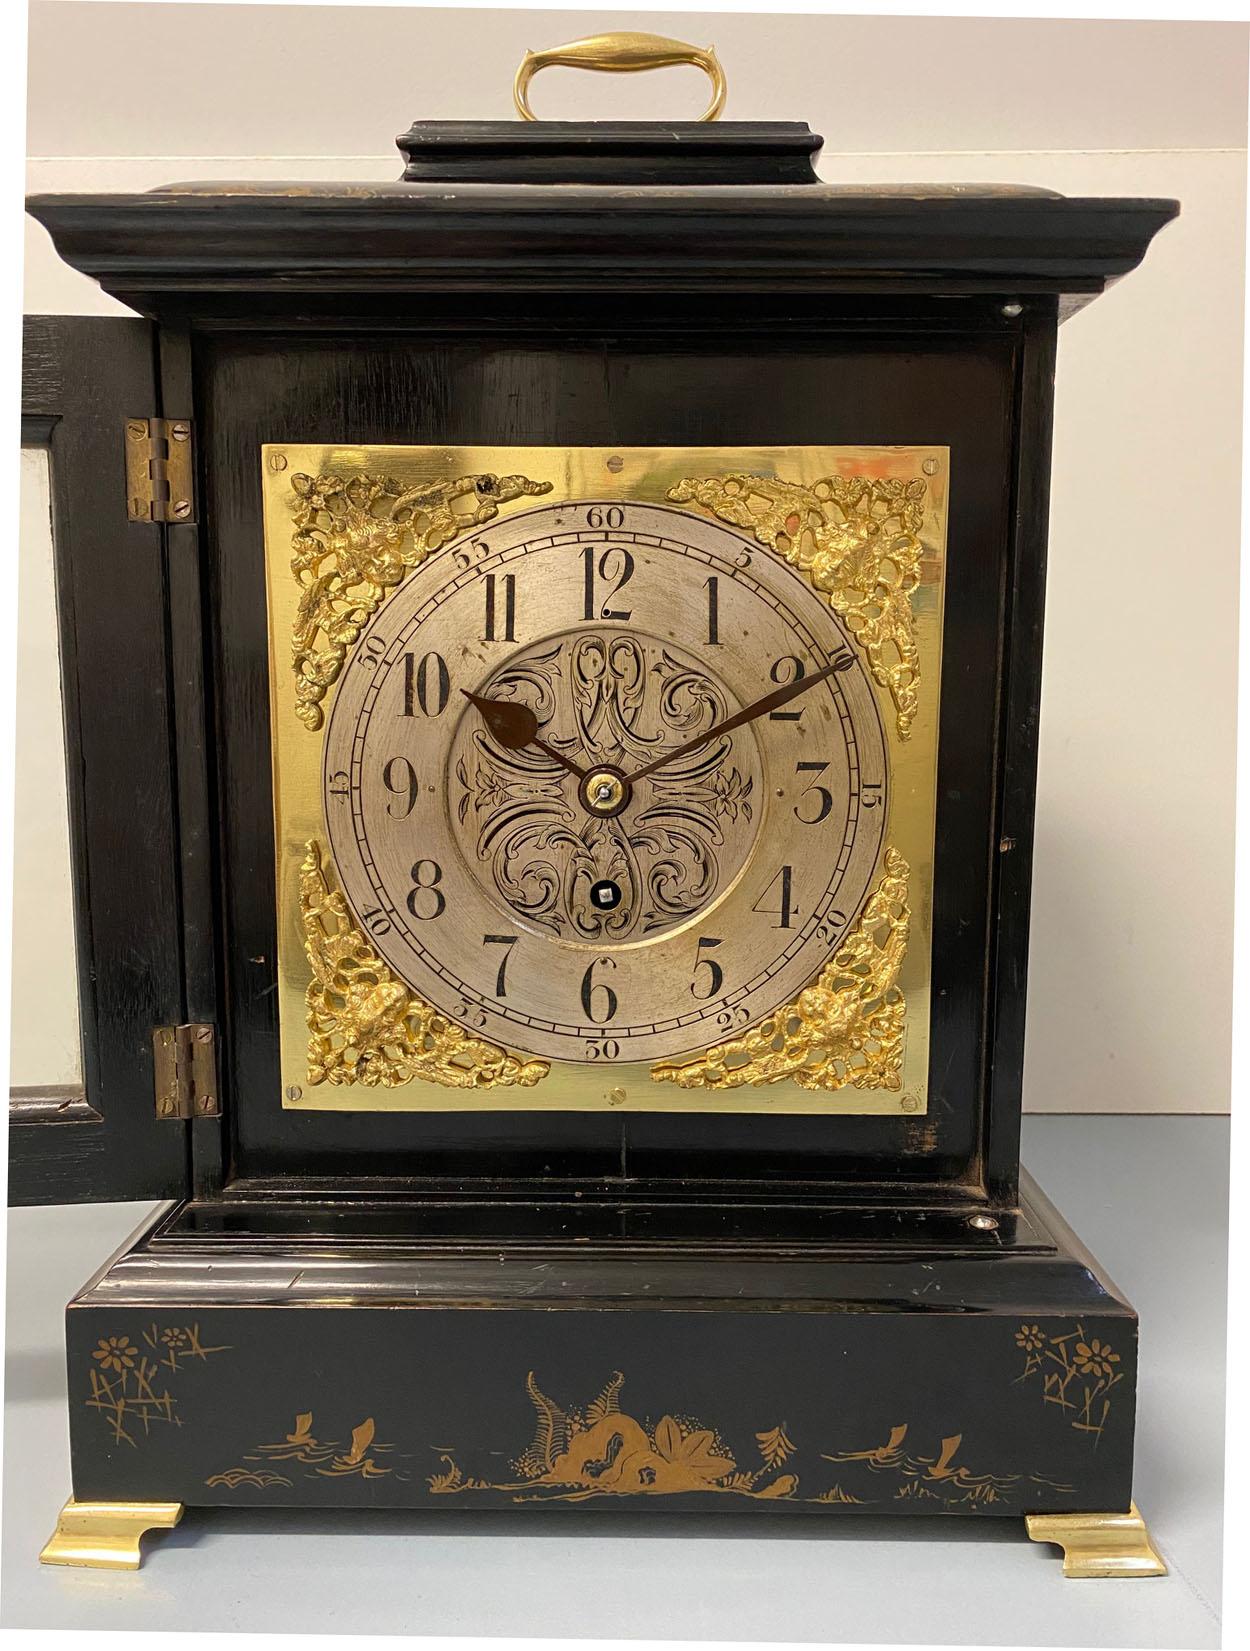 A fine quality English George III style black chinoiserie mantel clock, circa 1880.

The black lacquered wooden case with fine chinoiserie decorations including scenes of trees, ocean, islands, boats, birds and flowers, with brass loop handle, on